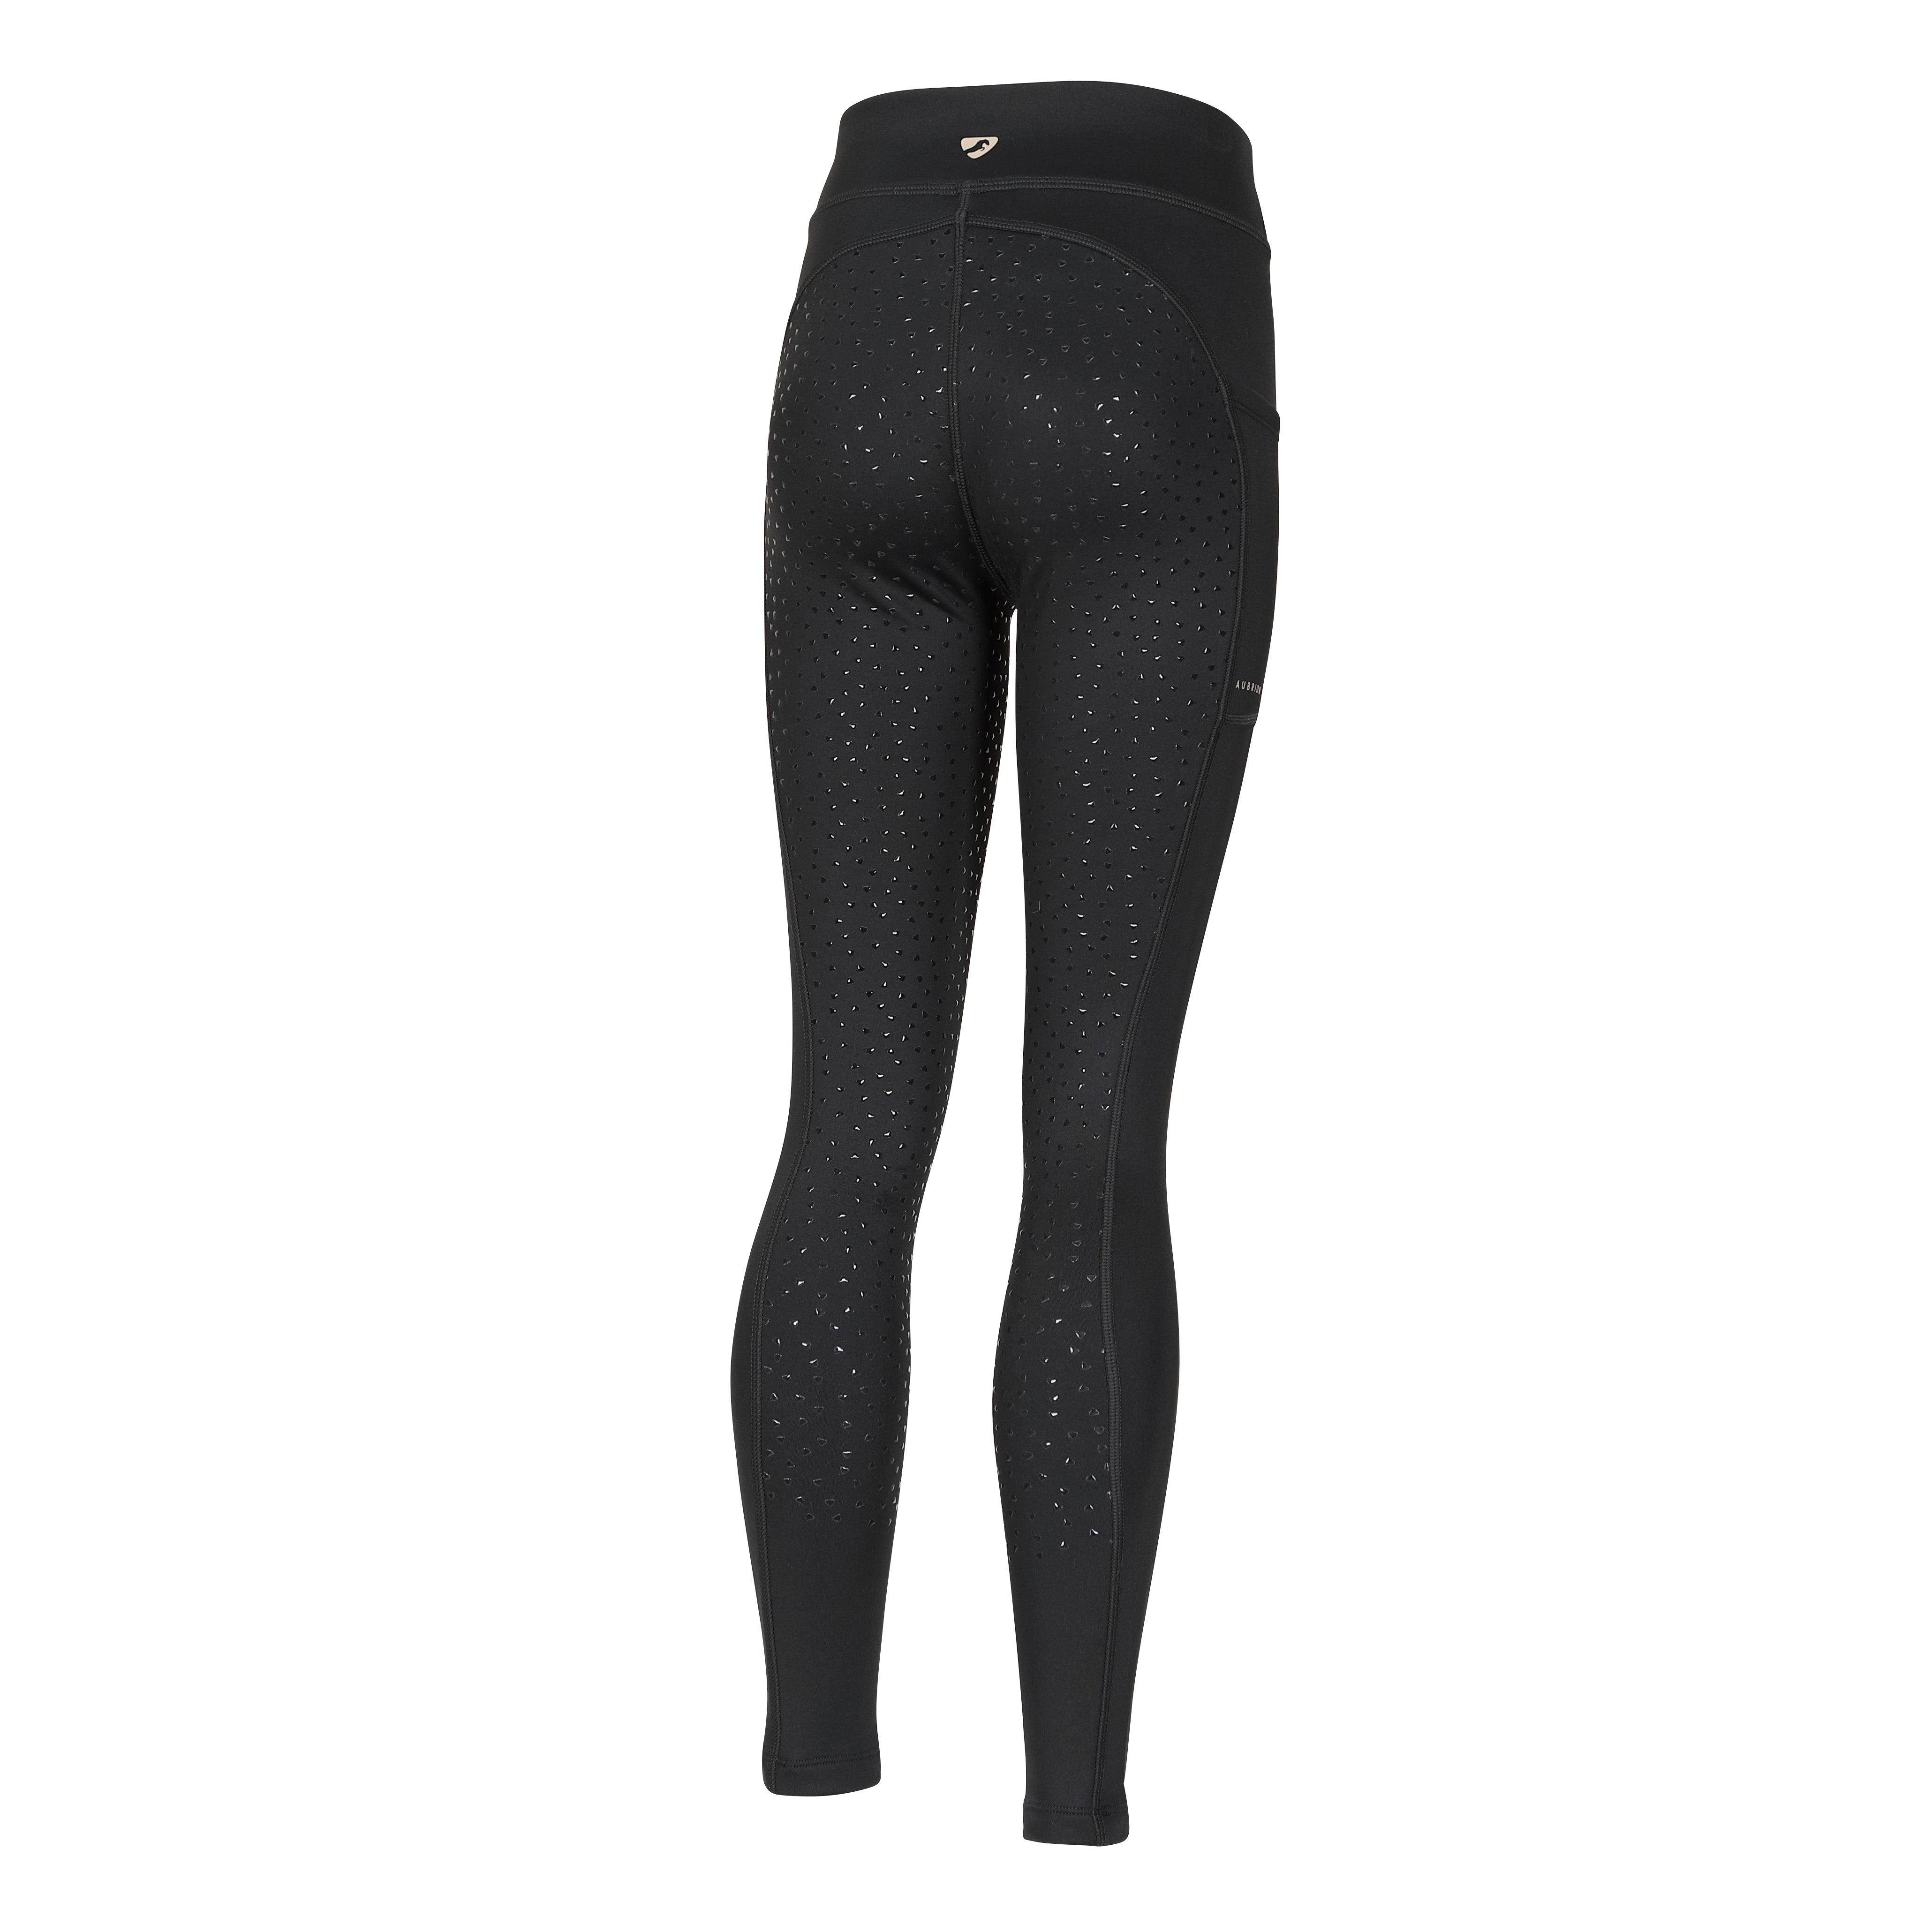 Shires Young Riders Aubrion Shield Winter Riding Tights